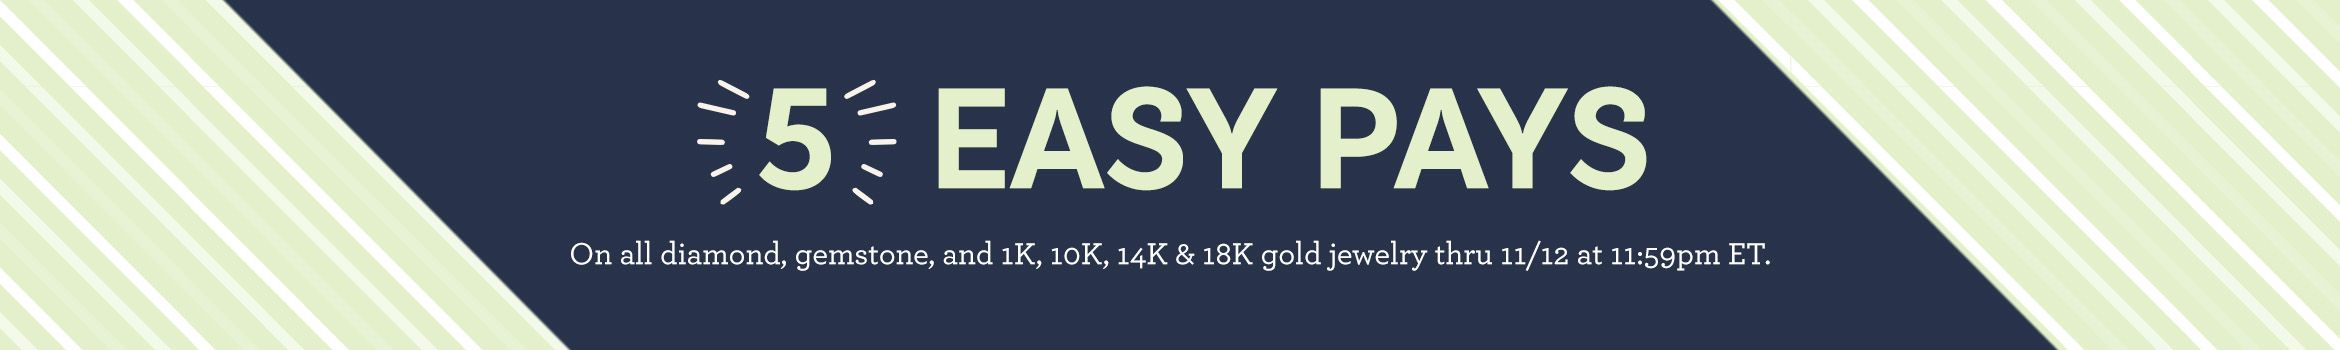 5 Easy Pays On all diamond, gemstone, and 1K, 10K, 14K & 18K gold jewelry thru 11/12 at 11:59pm ET.